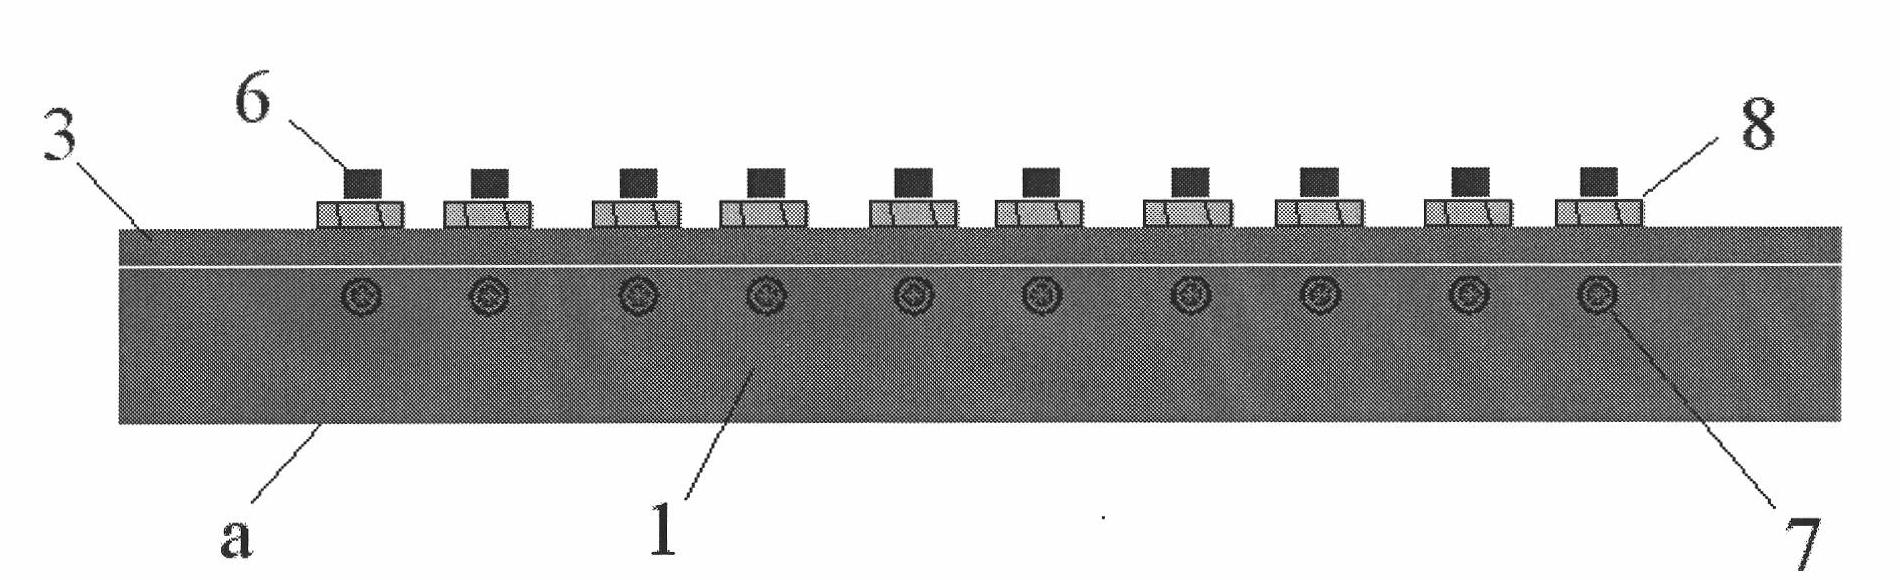 Block type end plate structure for measuring current distribution of PEMFC